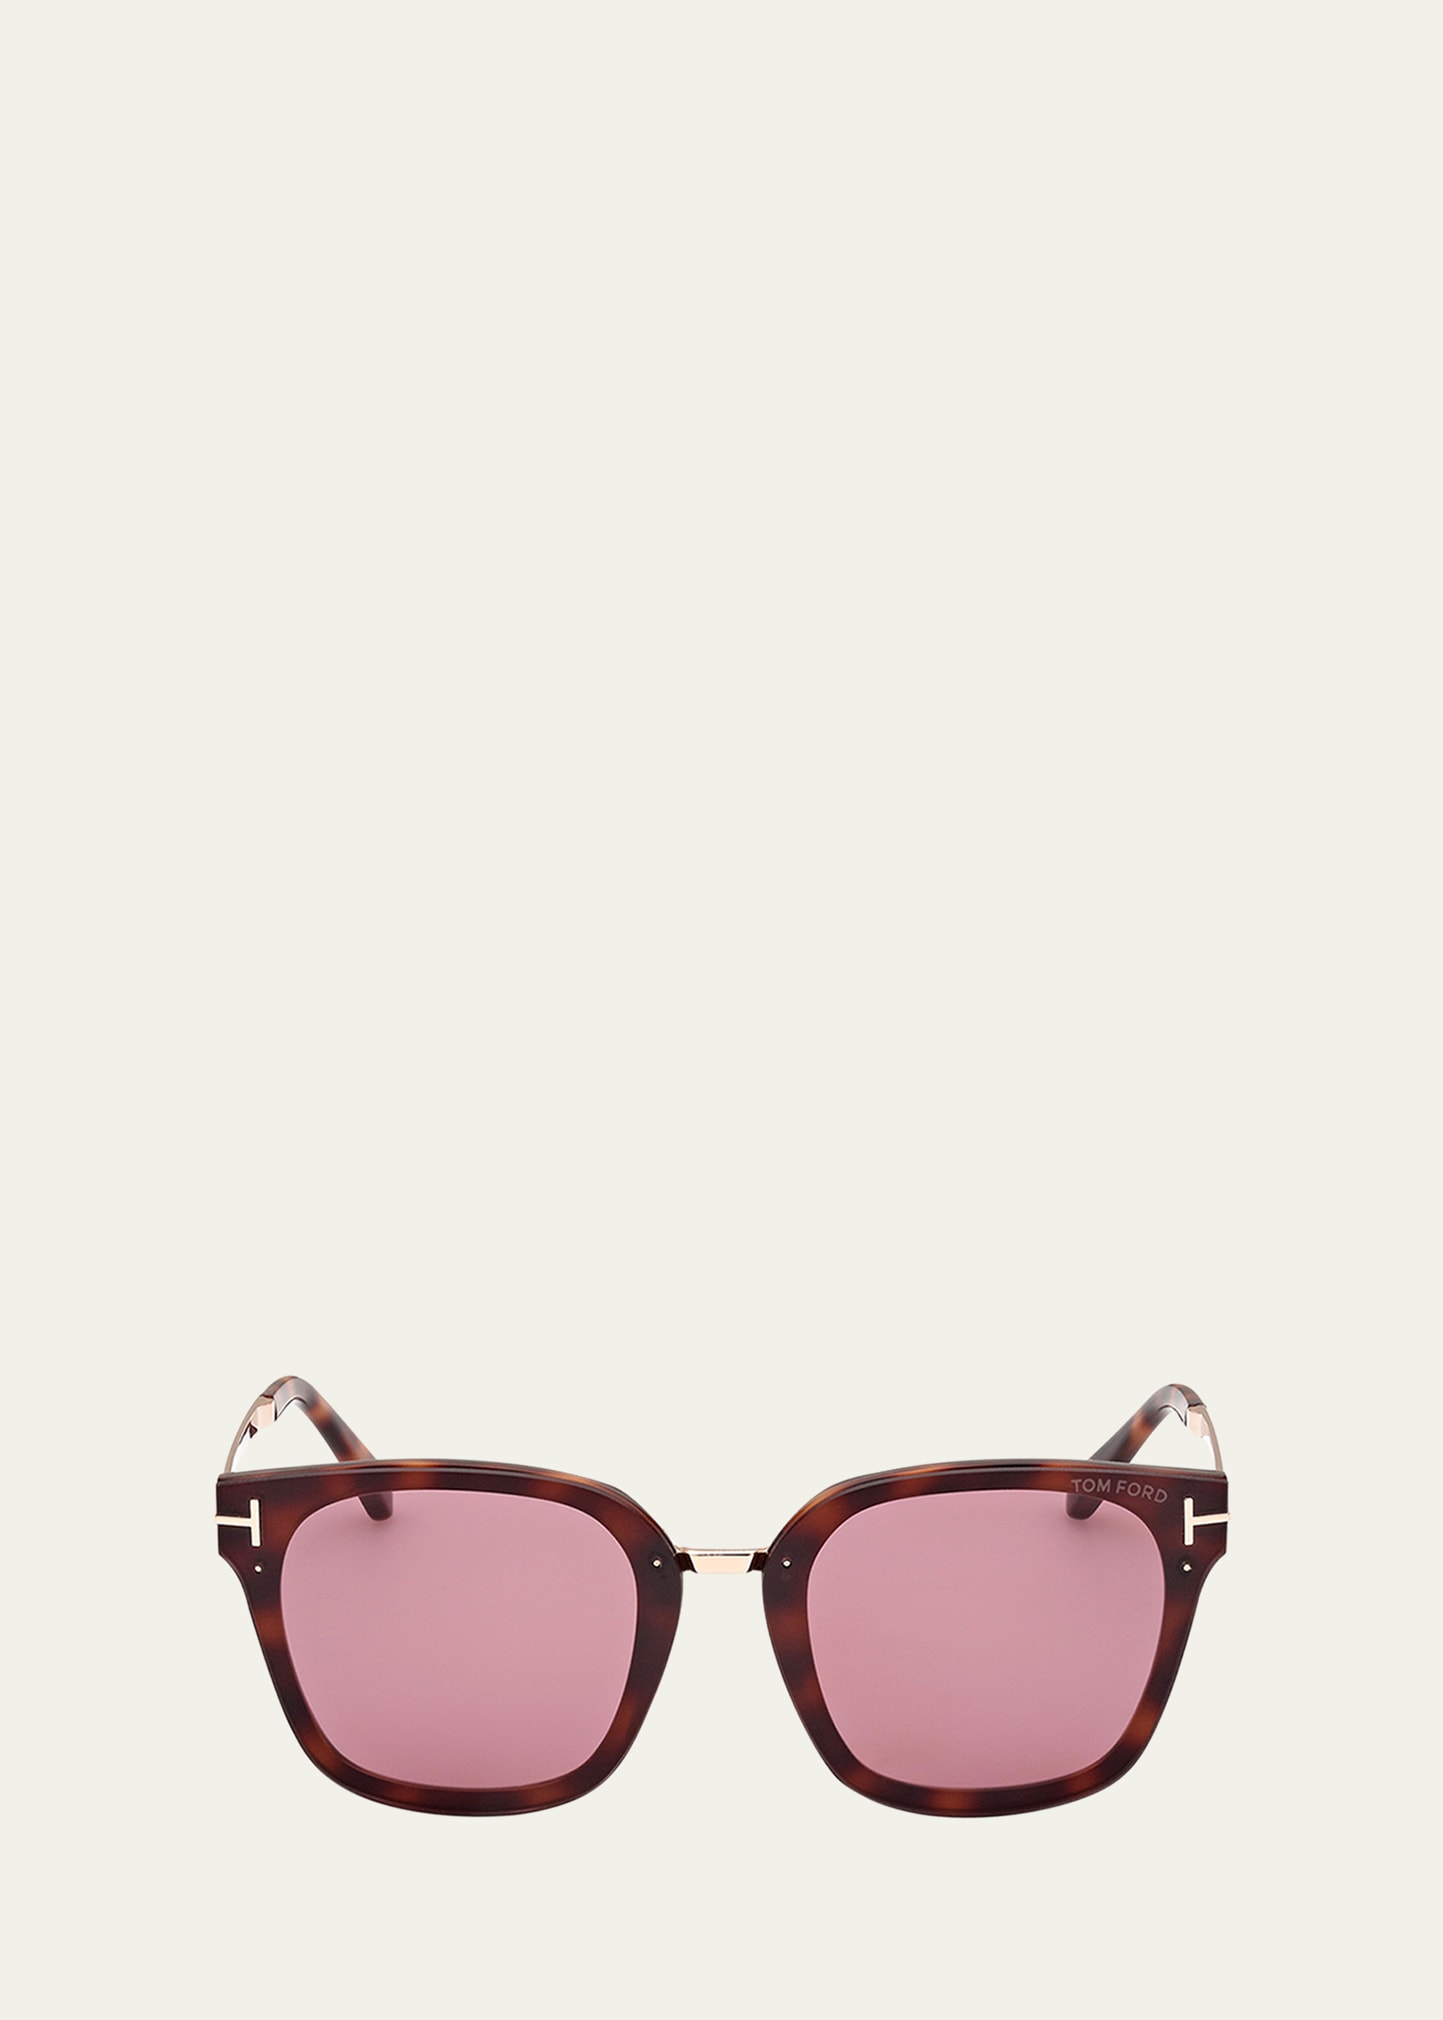 Tom Fors sunglasses injected square 